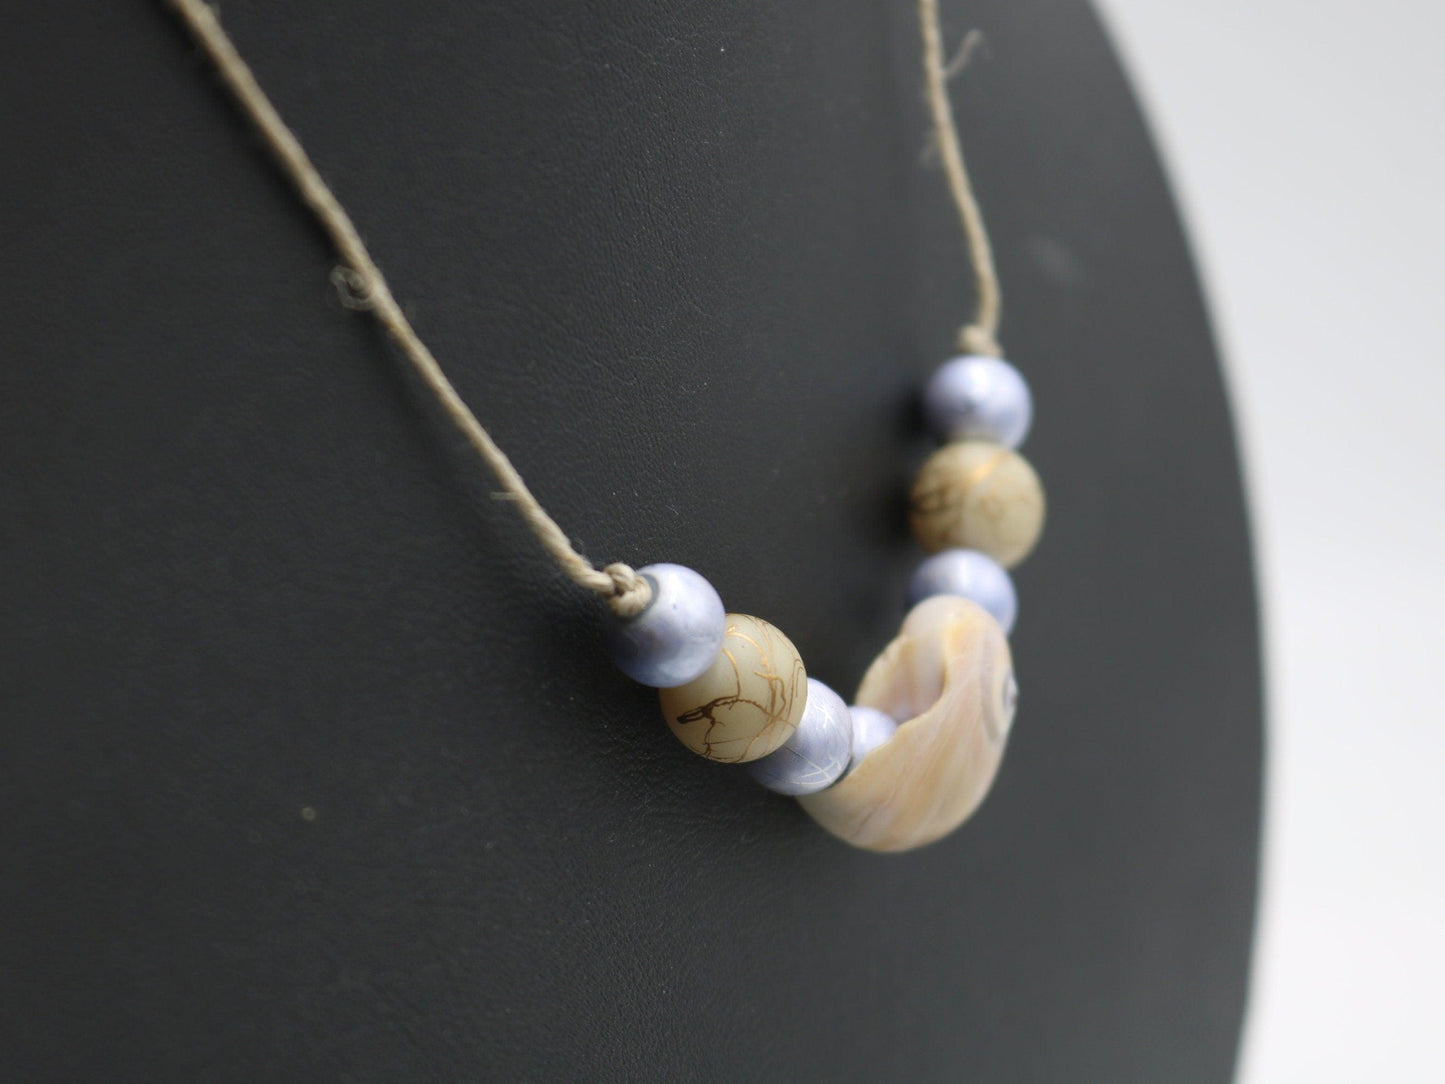 Unique One of a Kind Ocean Women's Nautical Necklace Florida with Spiral Sea Snail Shell Charm 18 1/2" Gold Toned Twine Handmade - Monkeysmojo